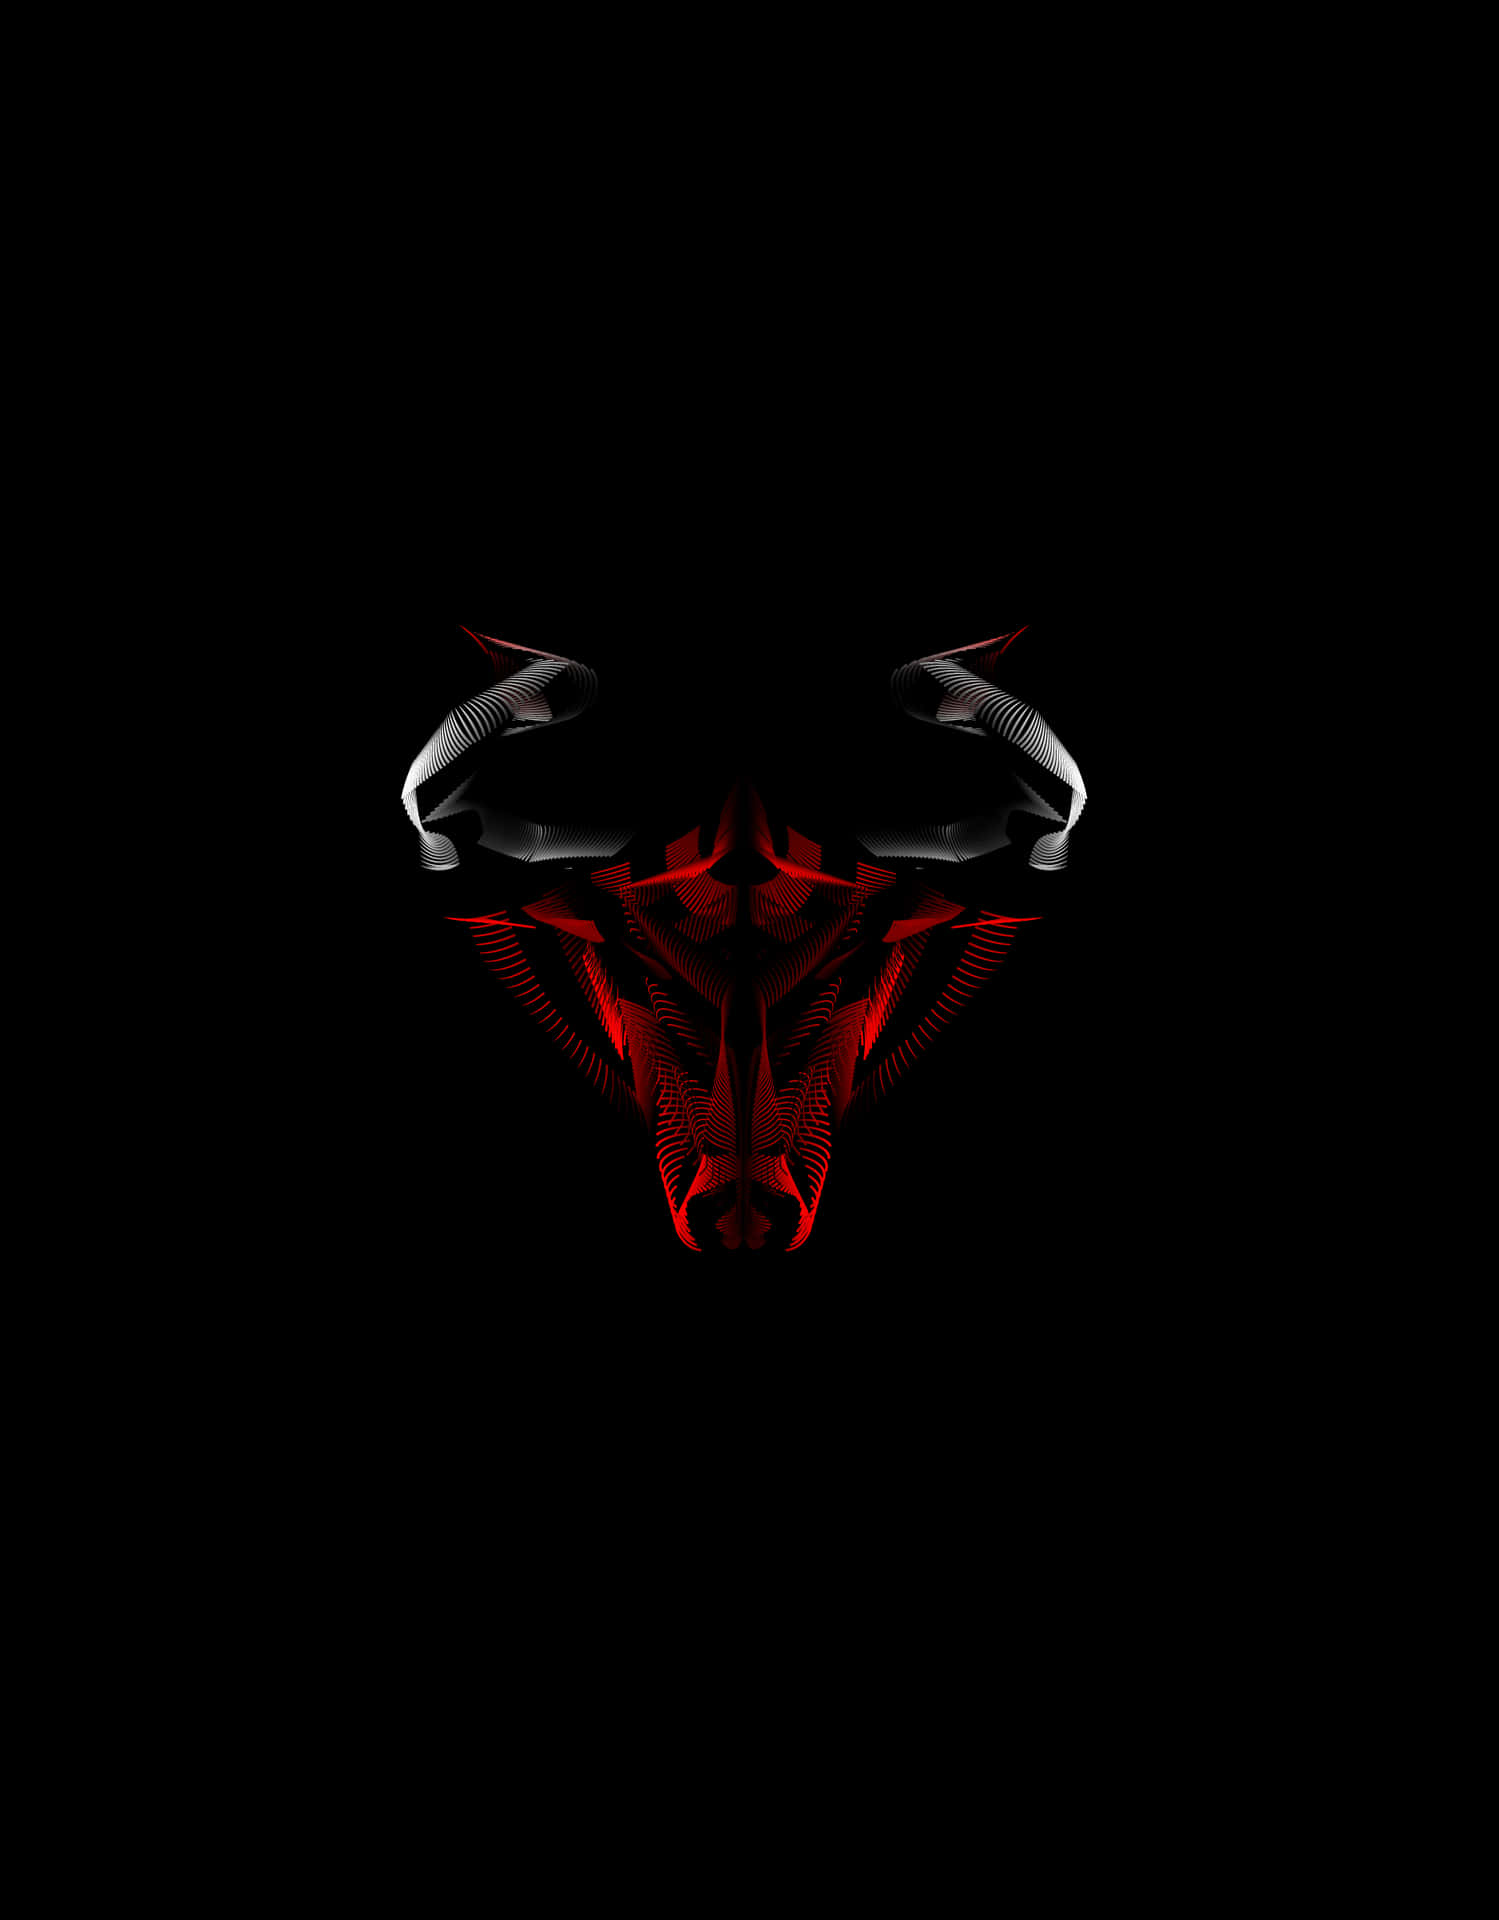 Rock The Red And White With A Chicago Bulls Iphone Background